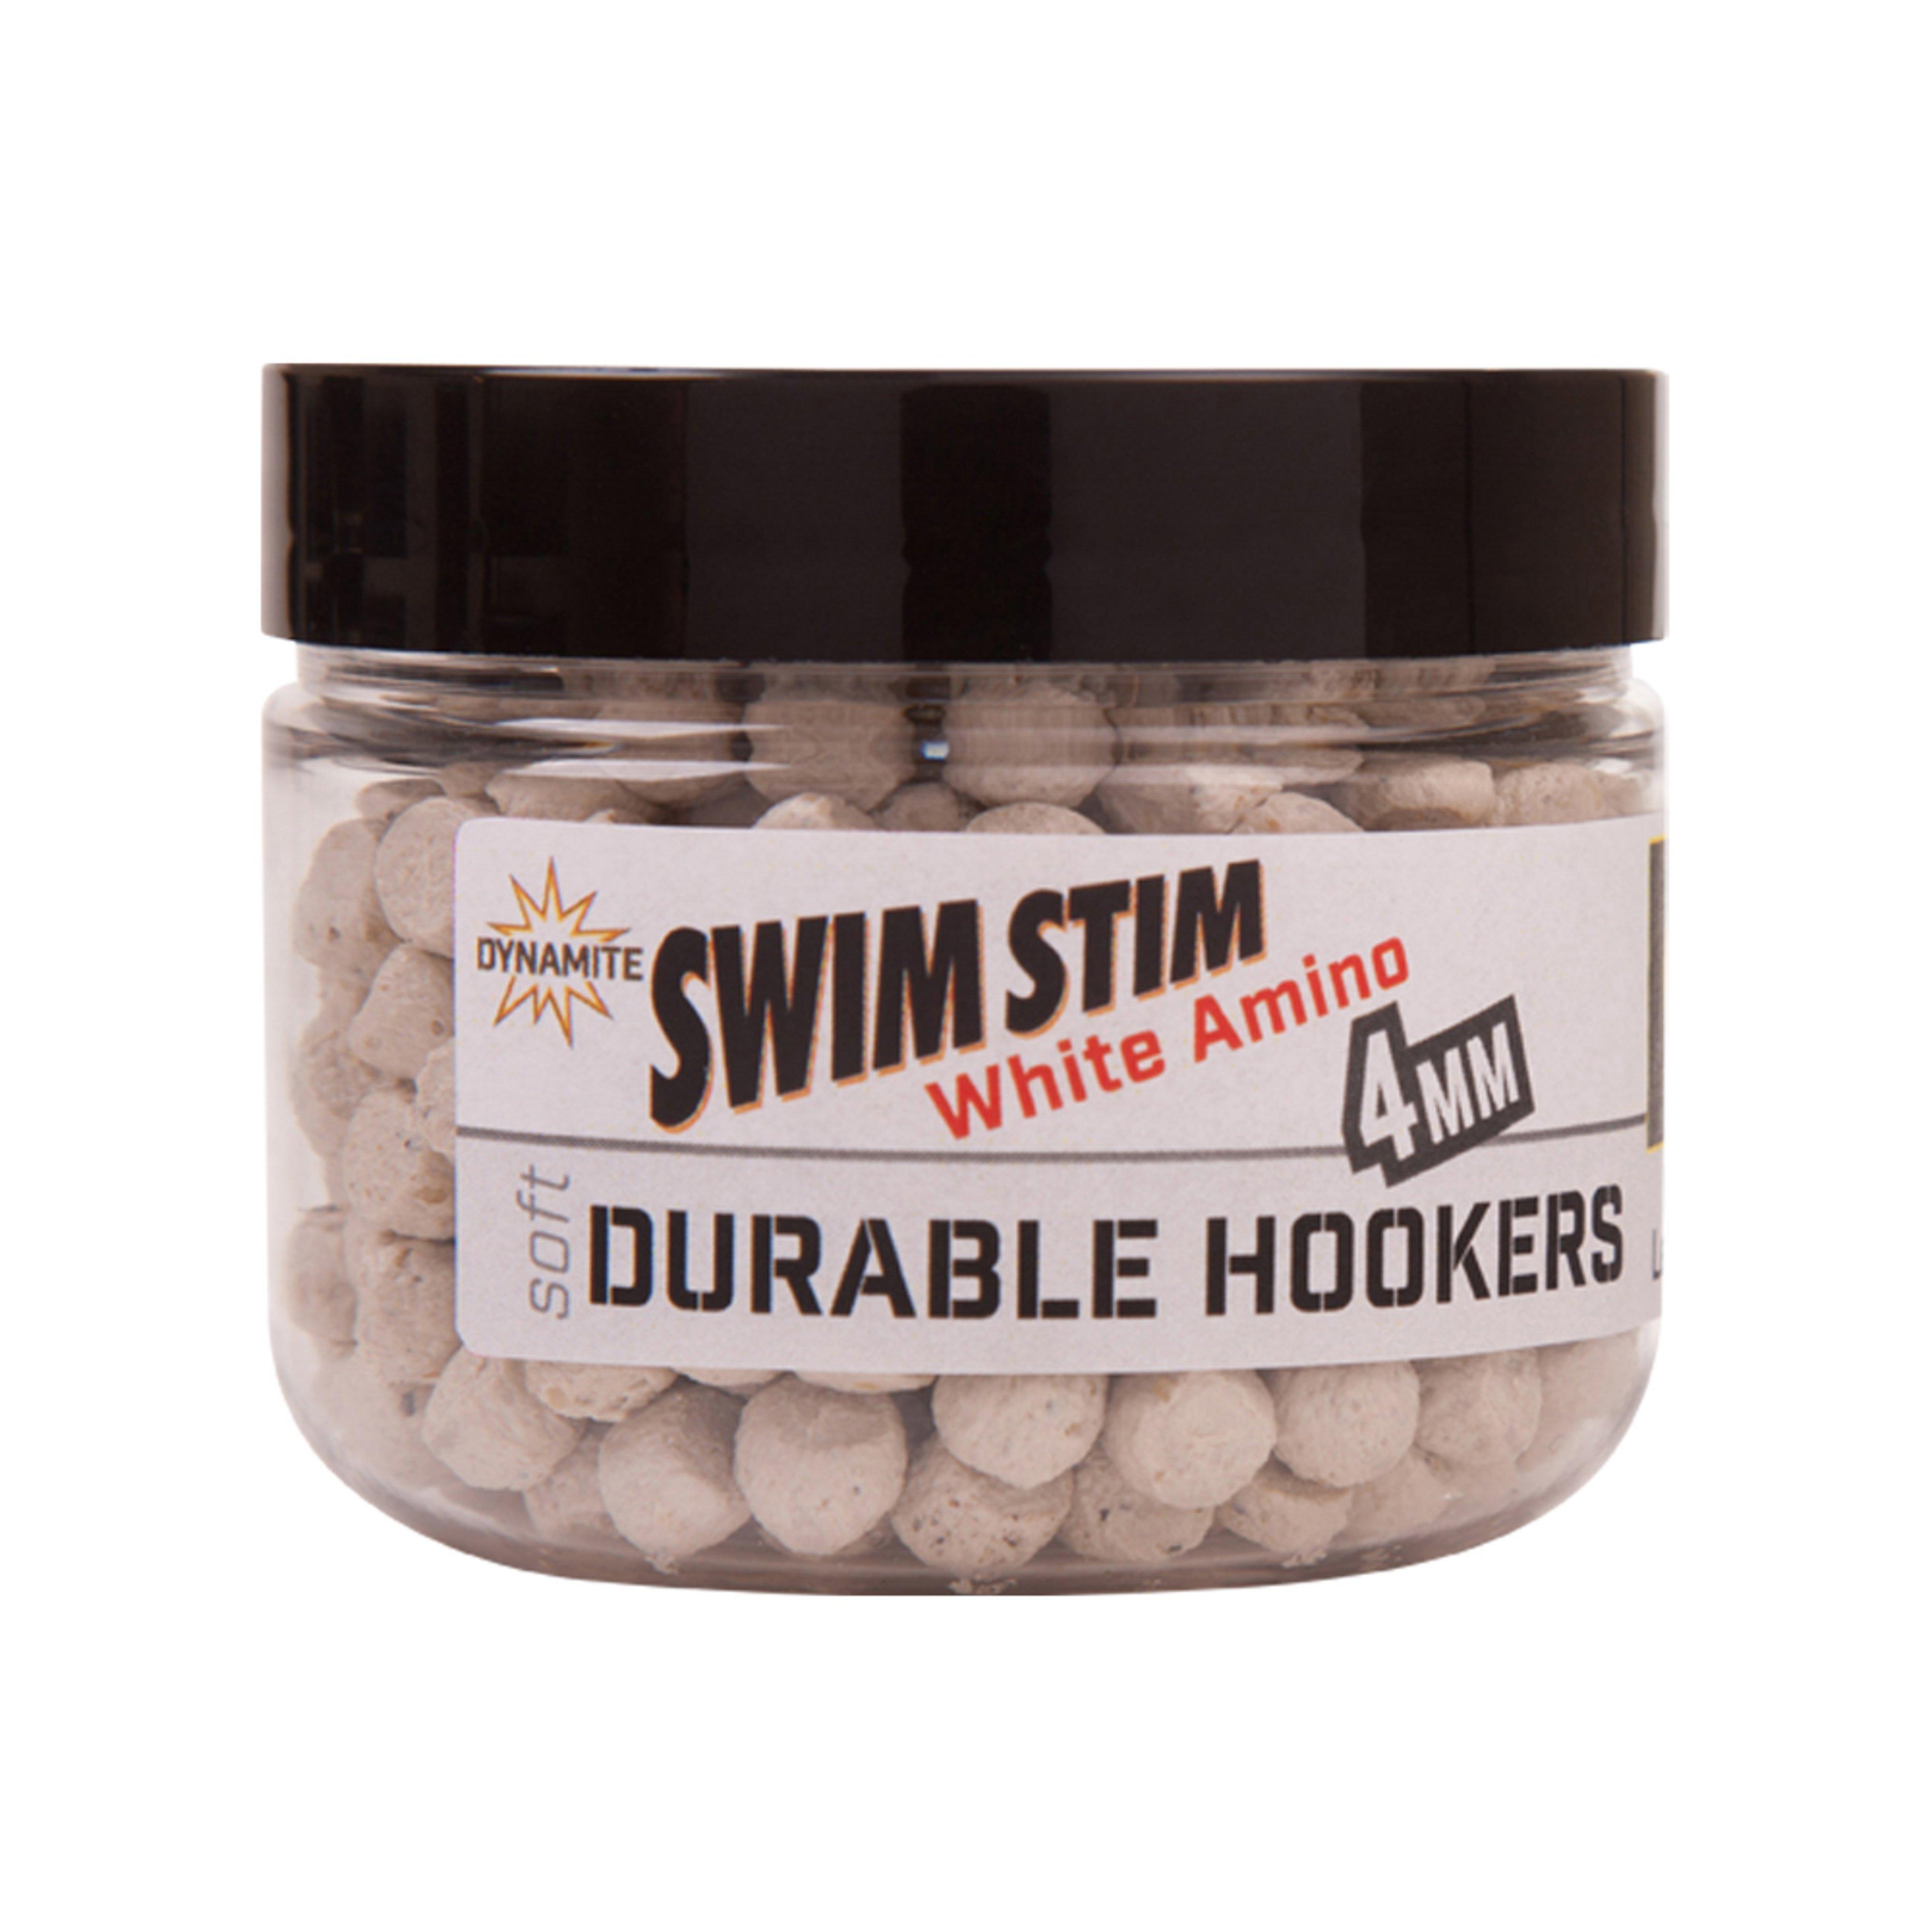 Dynamite Durable Pellet 4mm White Amino Review